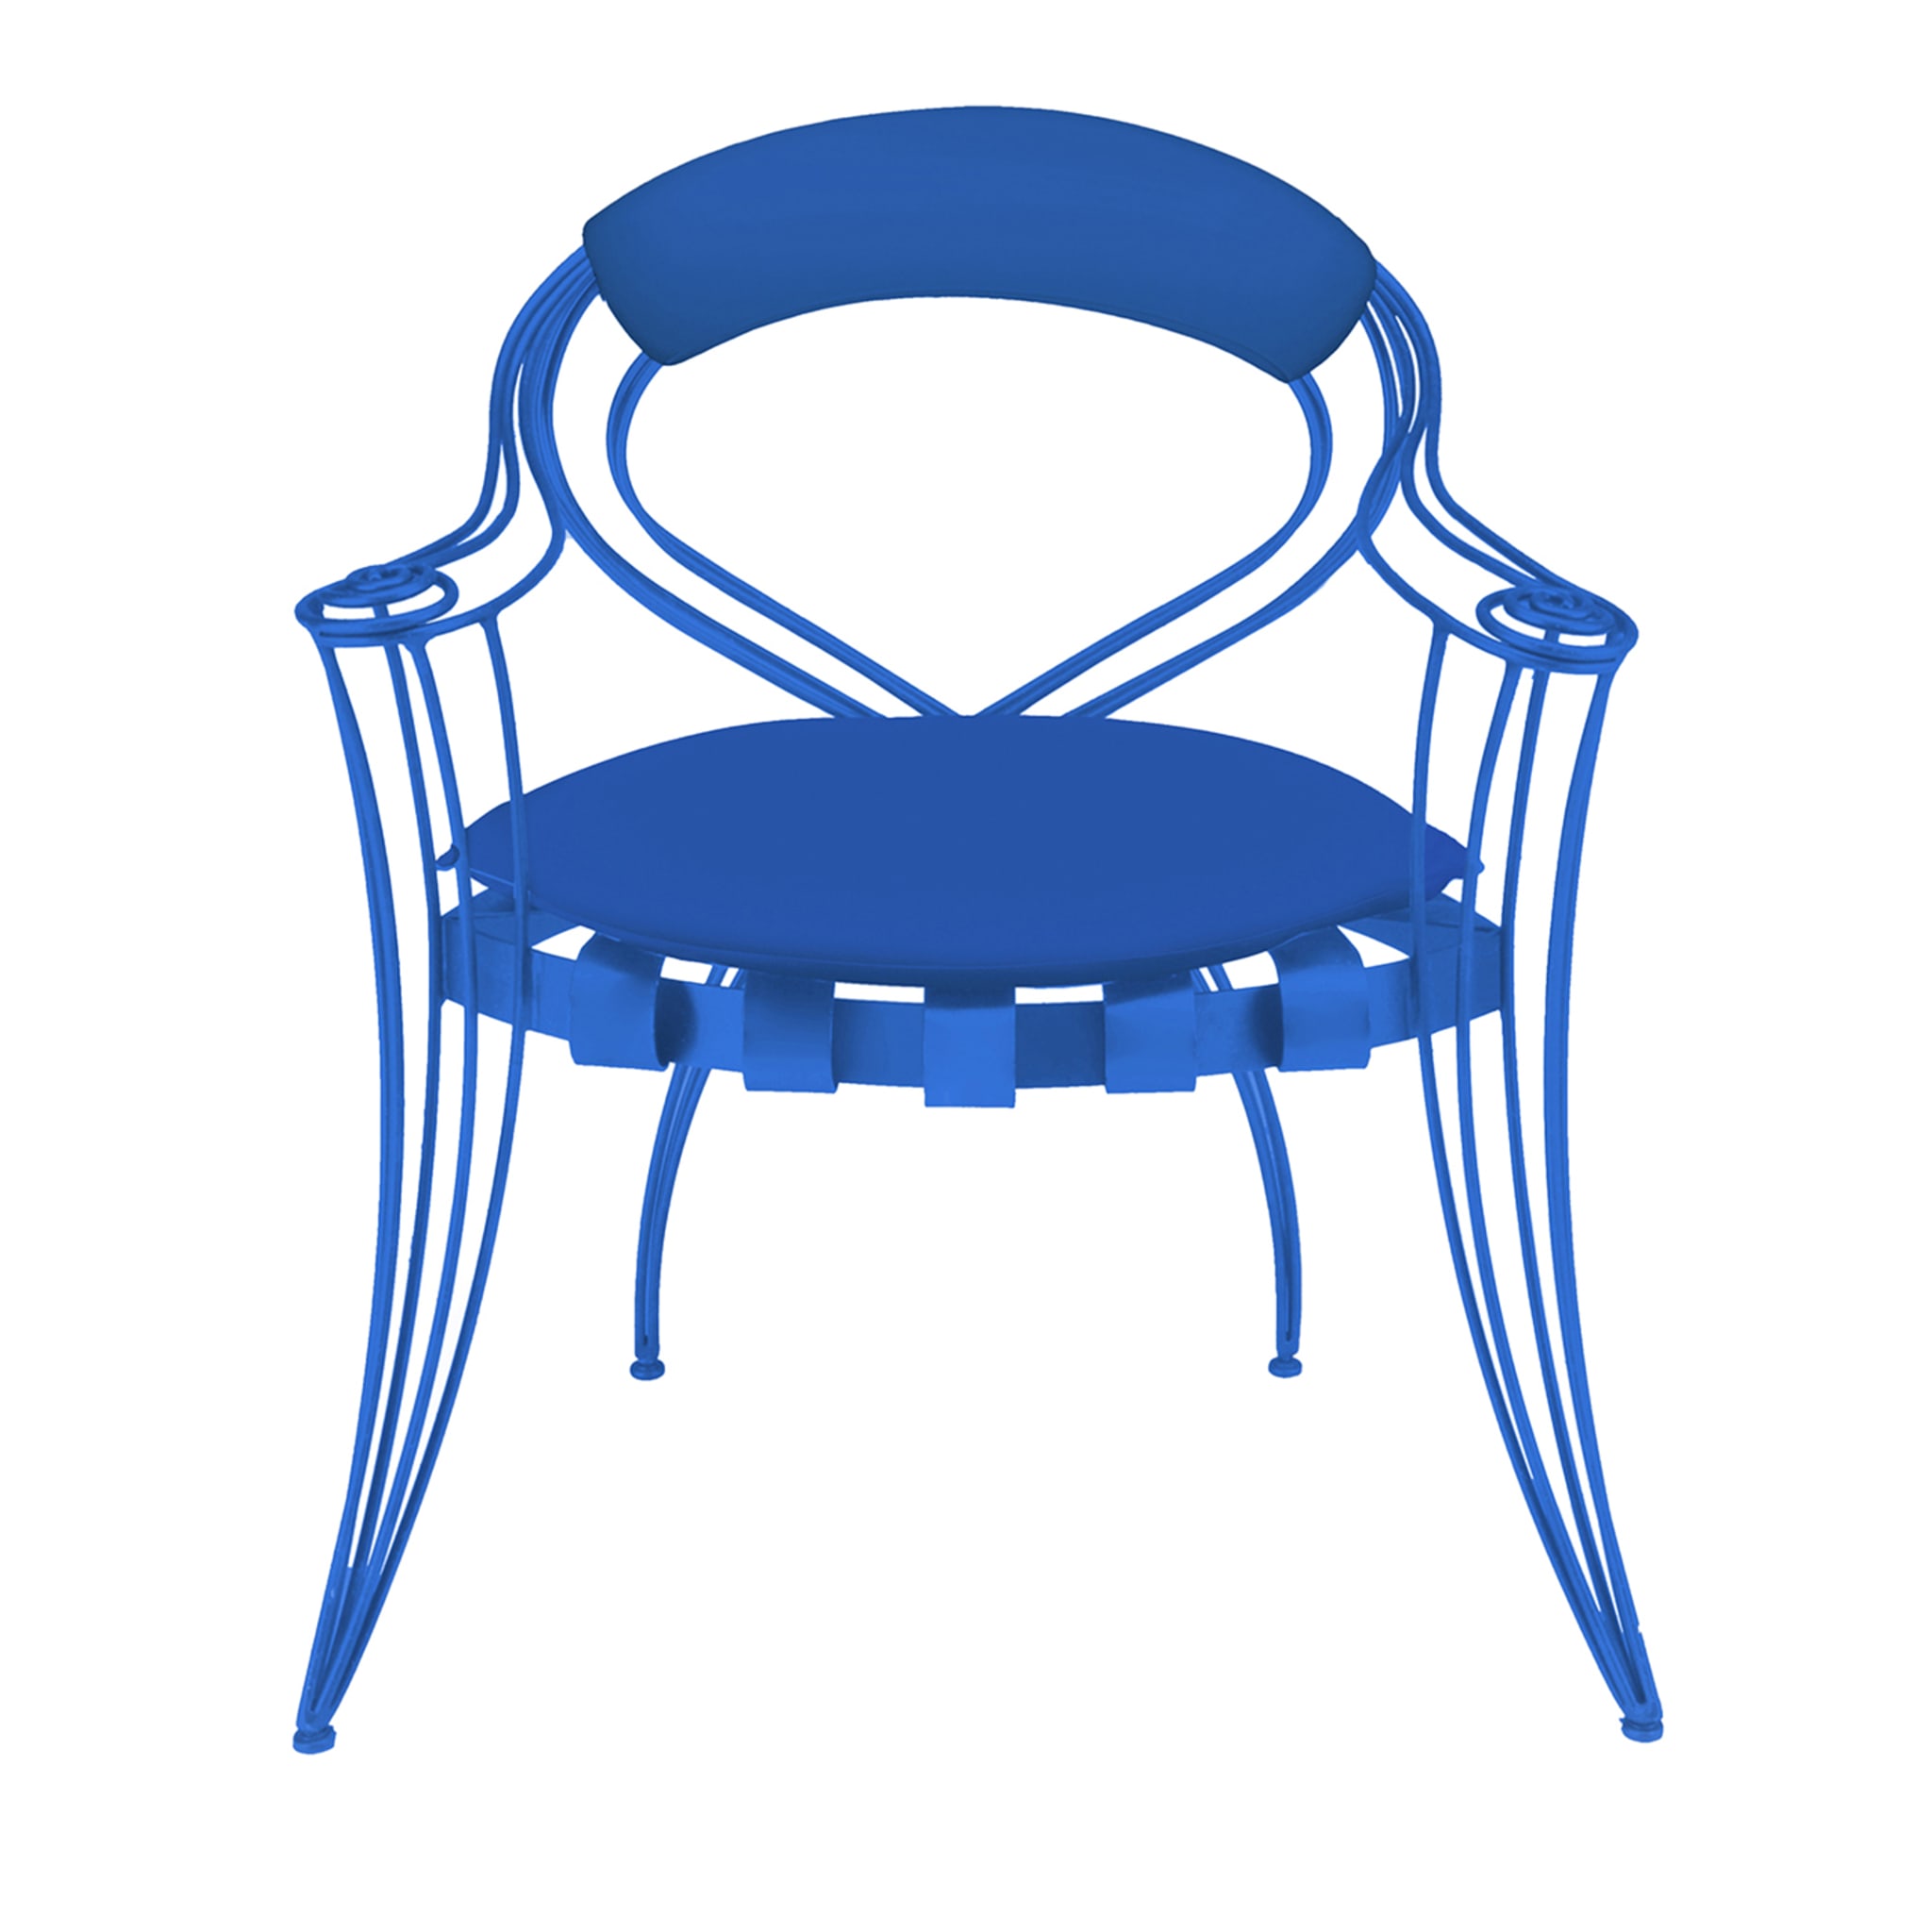 Opus Garden Blue Chair with Armrests by Carlo Rampazzi - Main view